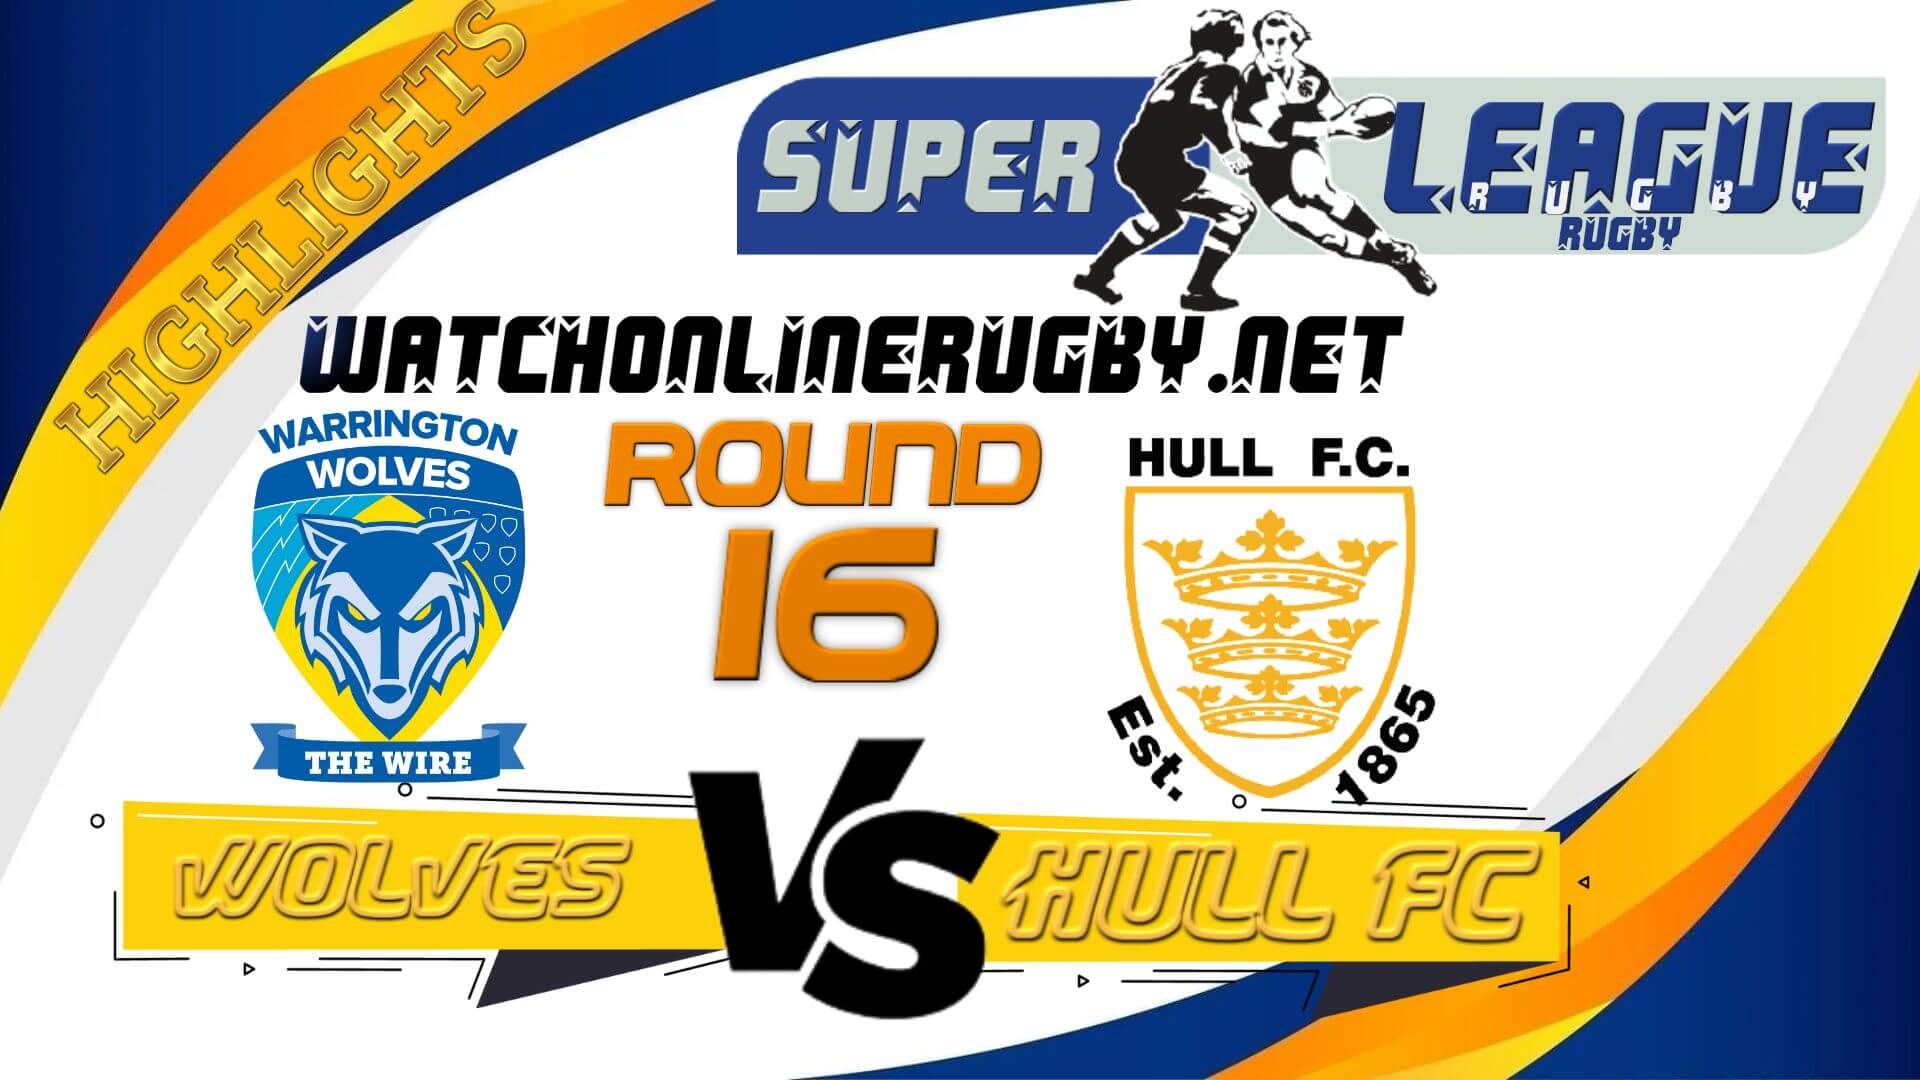 Warrington Wolves Vs Hull FC Super League Rugby 2022 RD 16